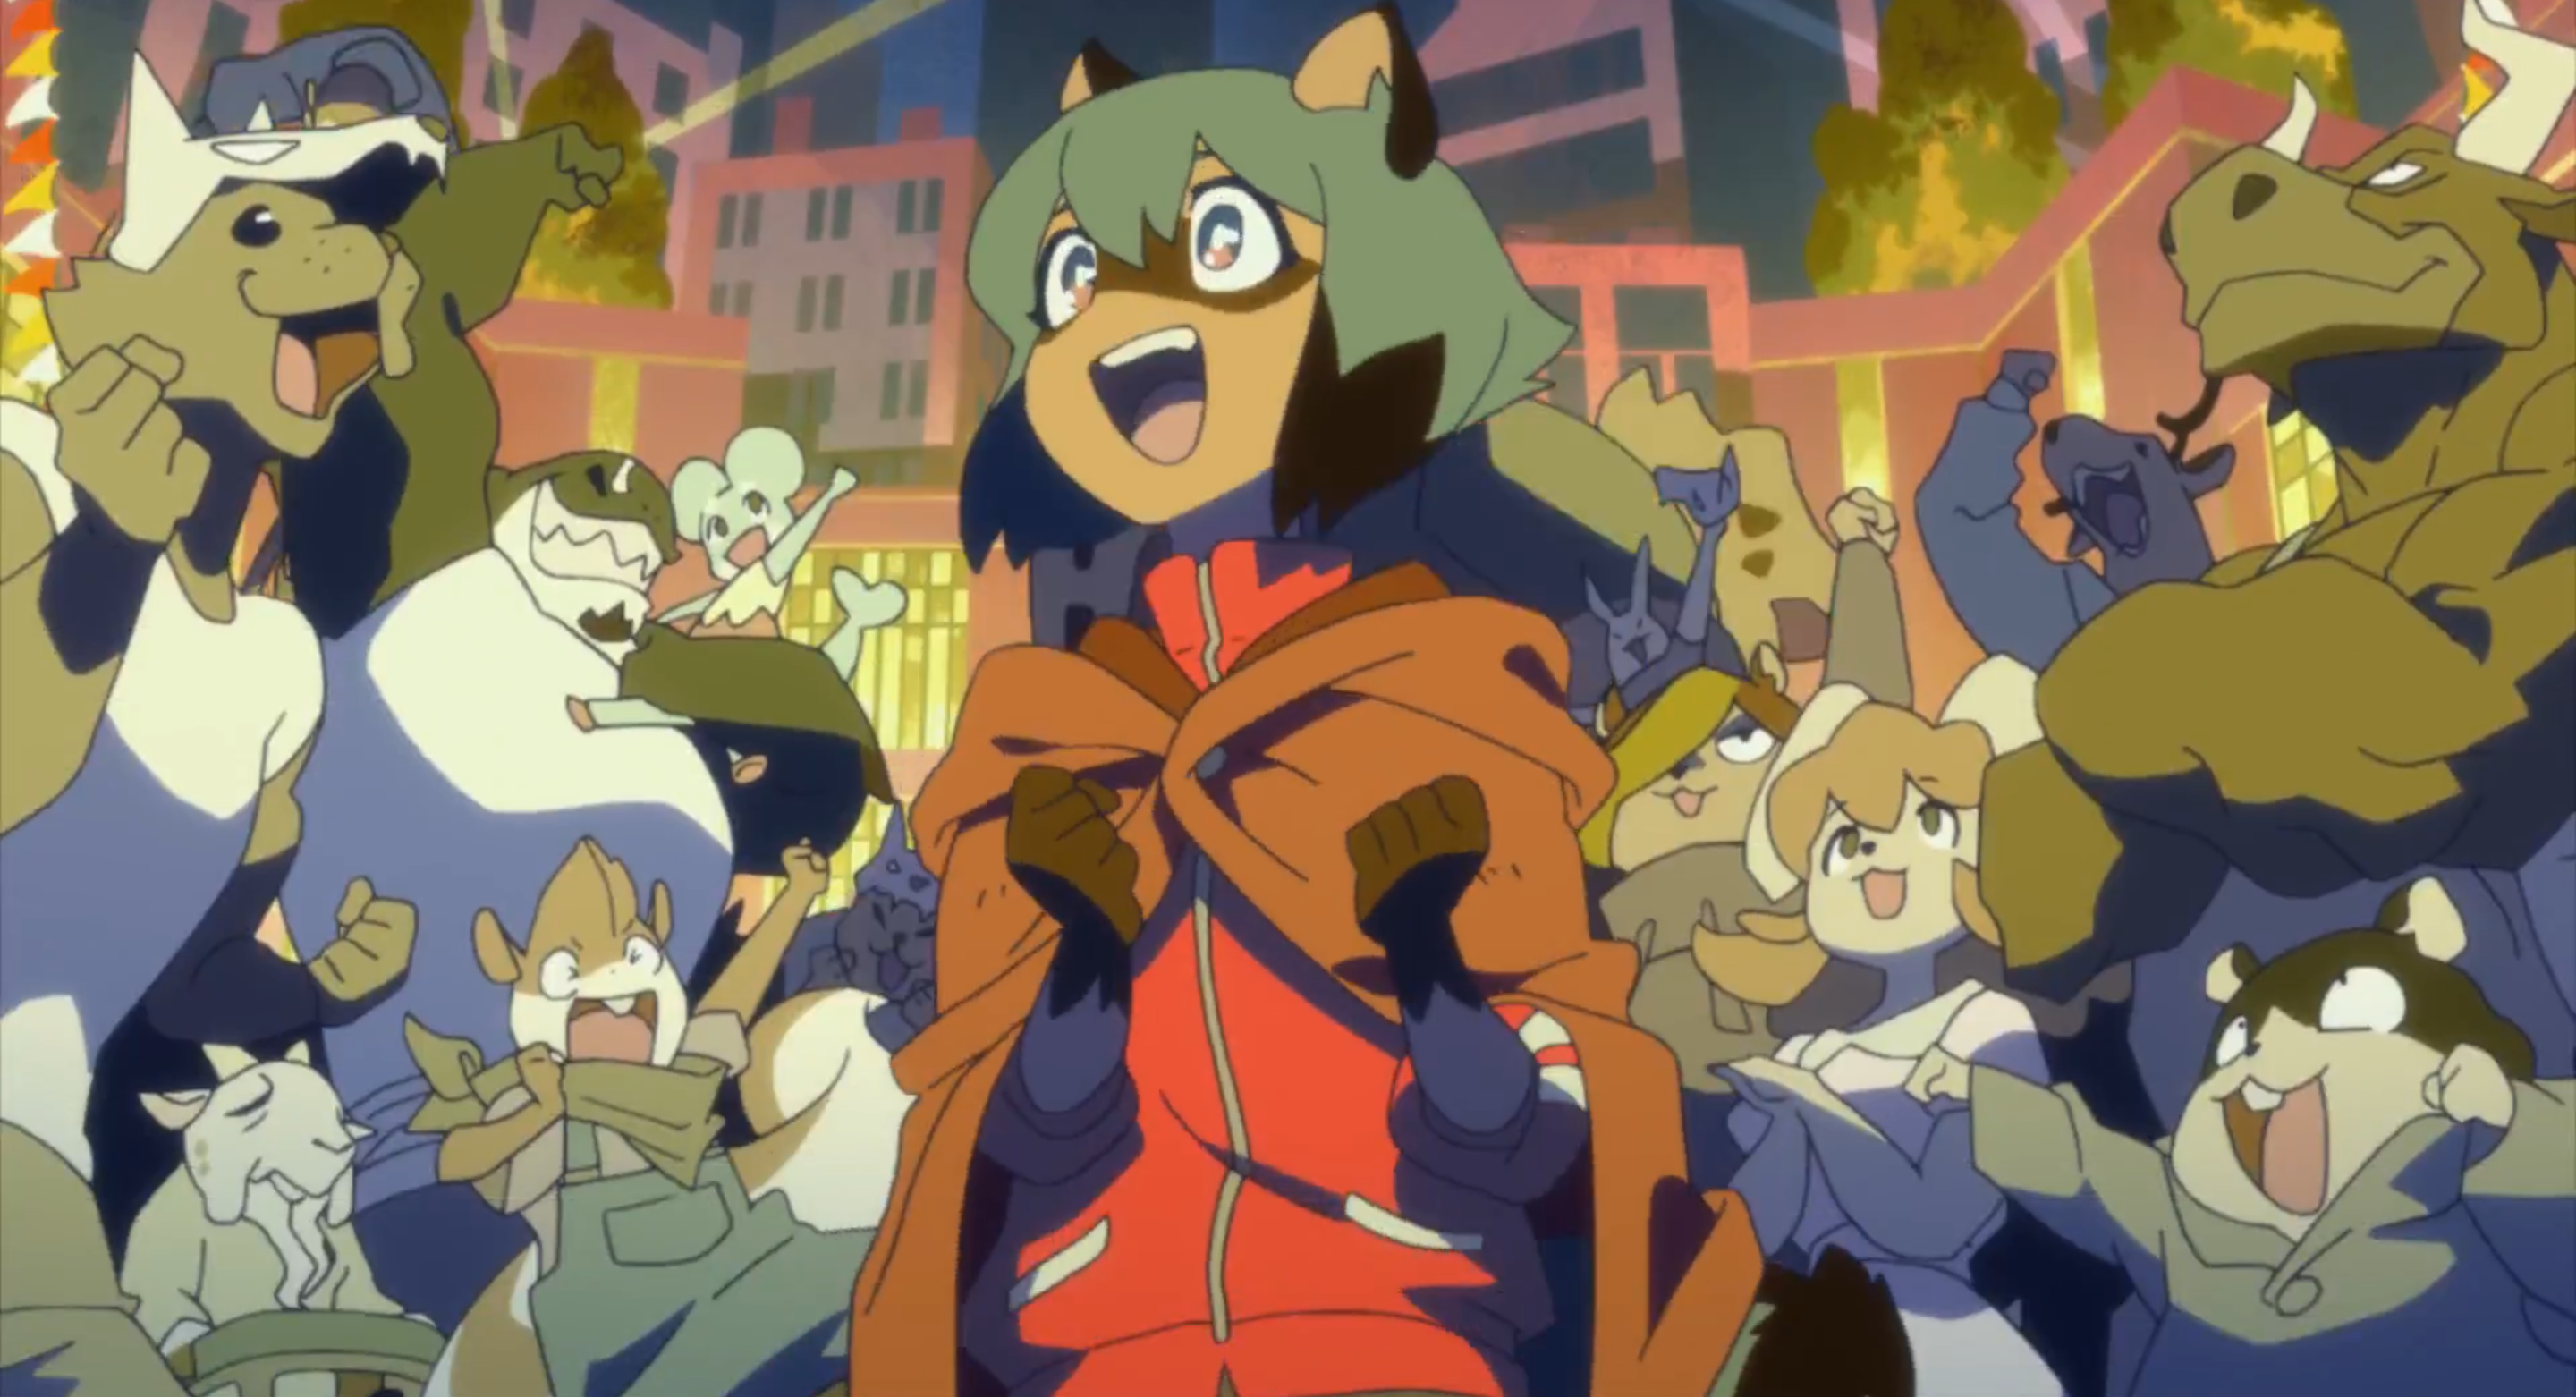 Furry Anime: The Growing Anime Subculture